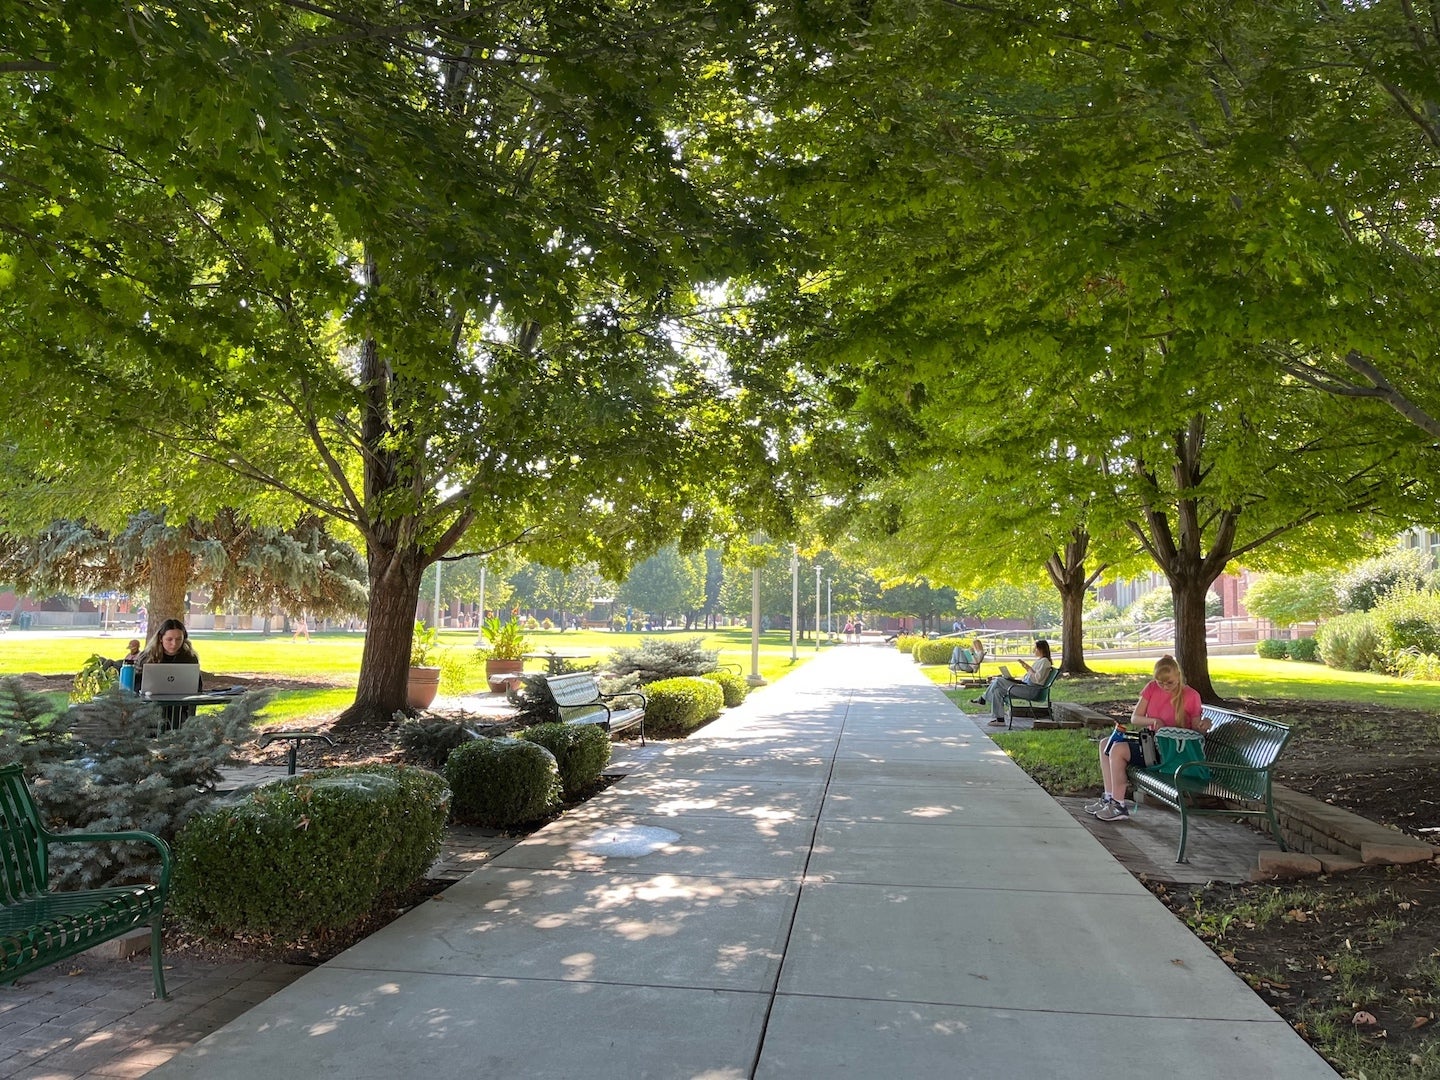 A path through the Quad at Boise State with trees and benches on either side and people sitting and studying